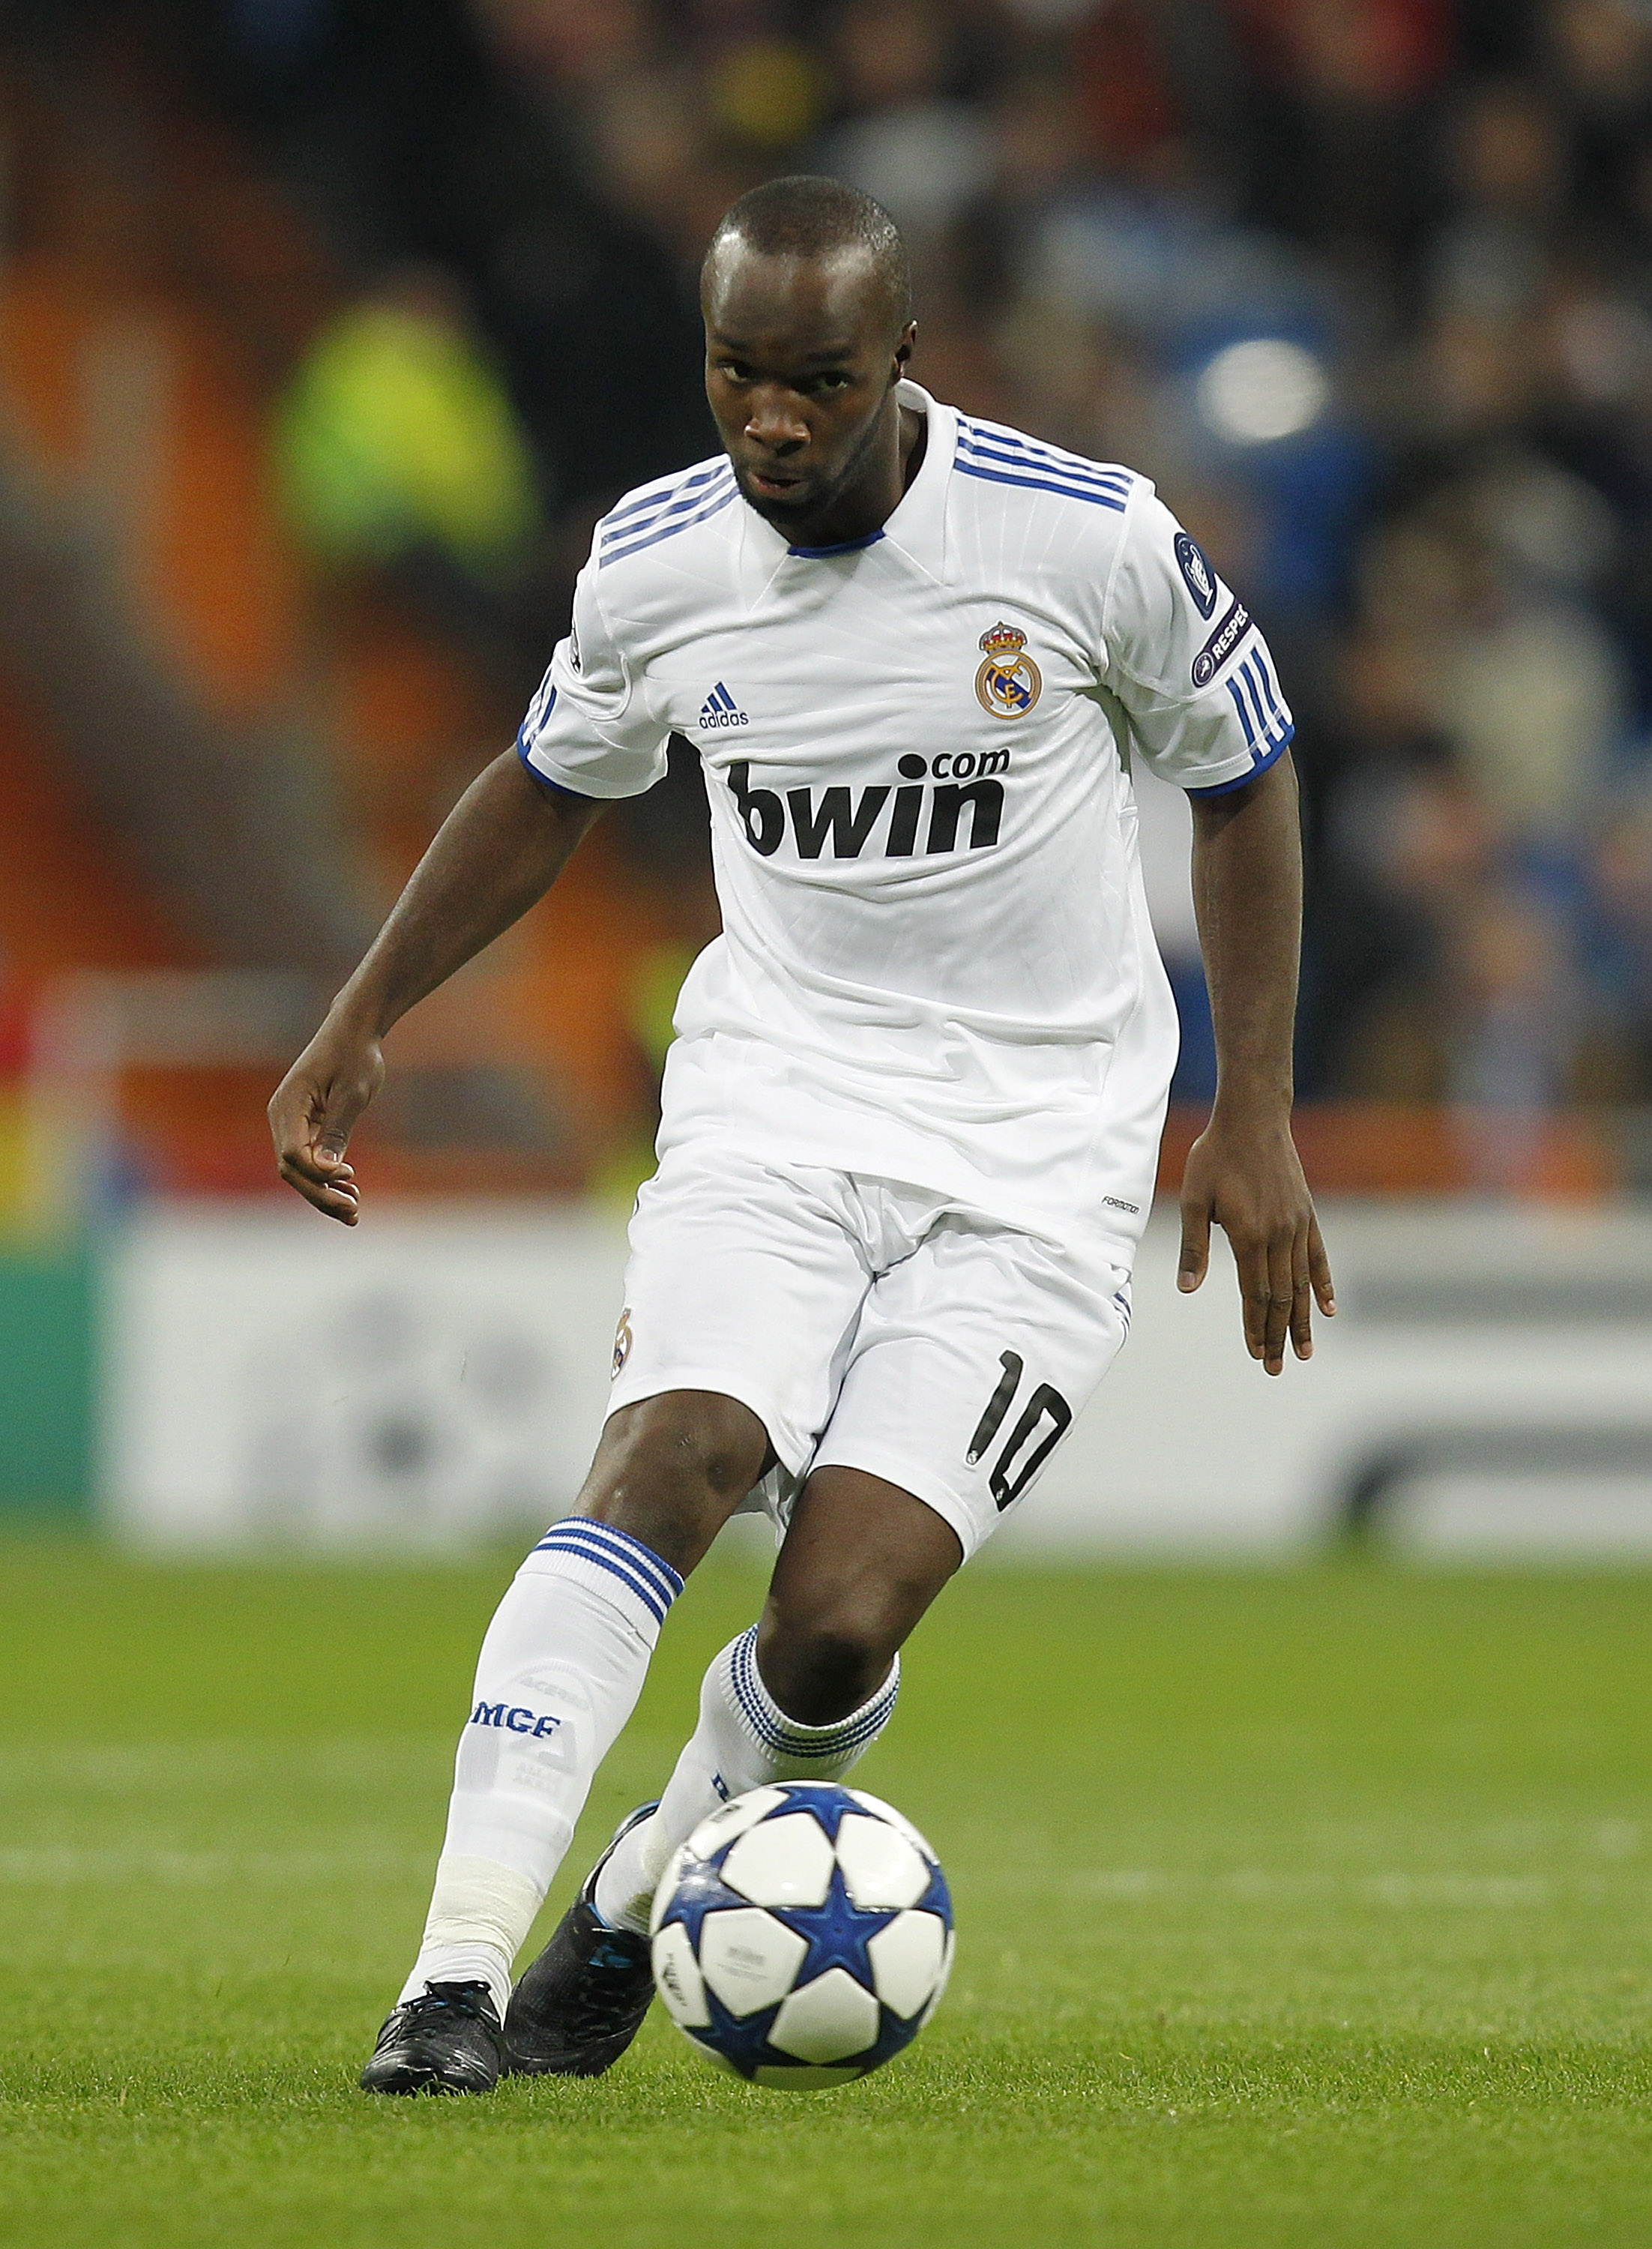 MADRID, SPAIN - DECEMBER 08:  Lass Diarra of Real Madrid in action during the Champions League group G match between Real Madrid and AJ Auxerre at Estadio Santiago Bernabeu on December 8, 2010 in Madrid, Spain.  (Photo by Angel Martinez/Getty Images)